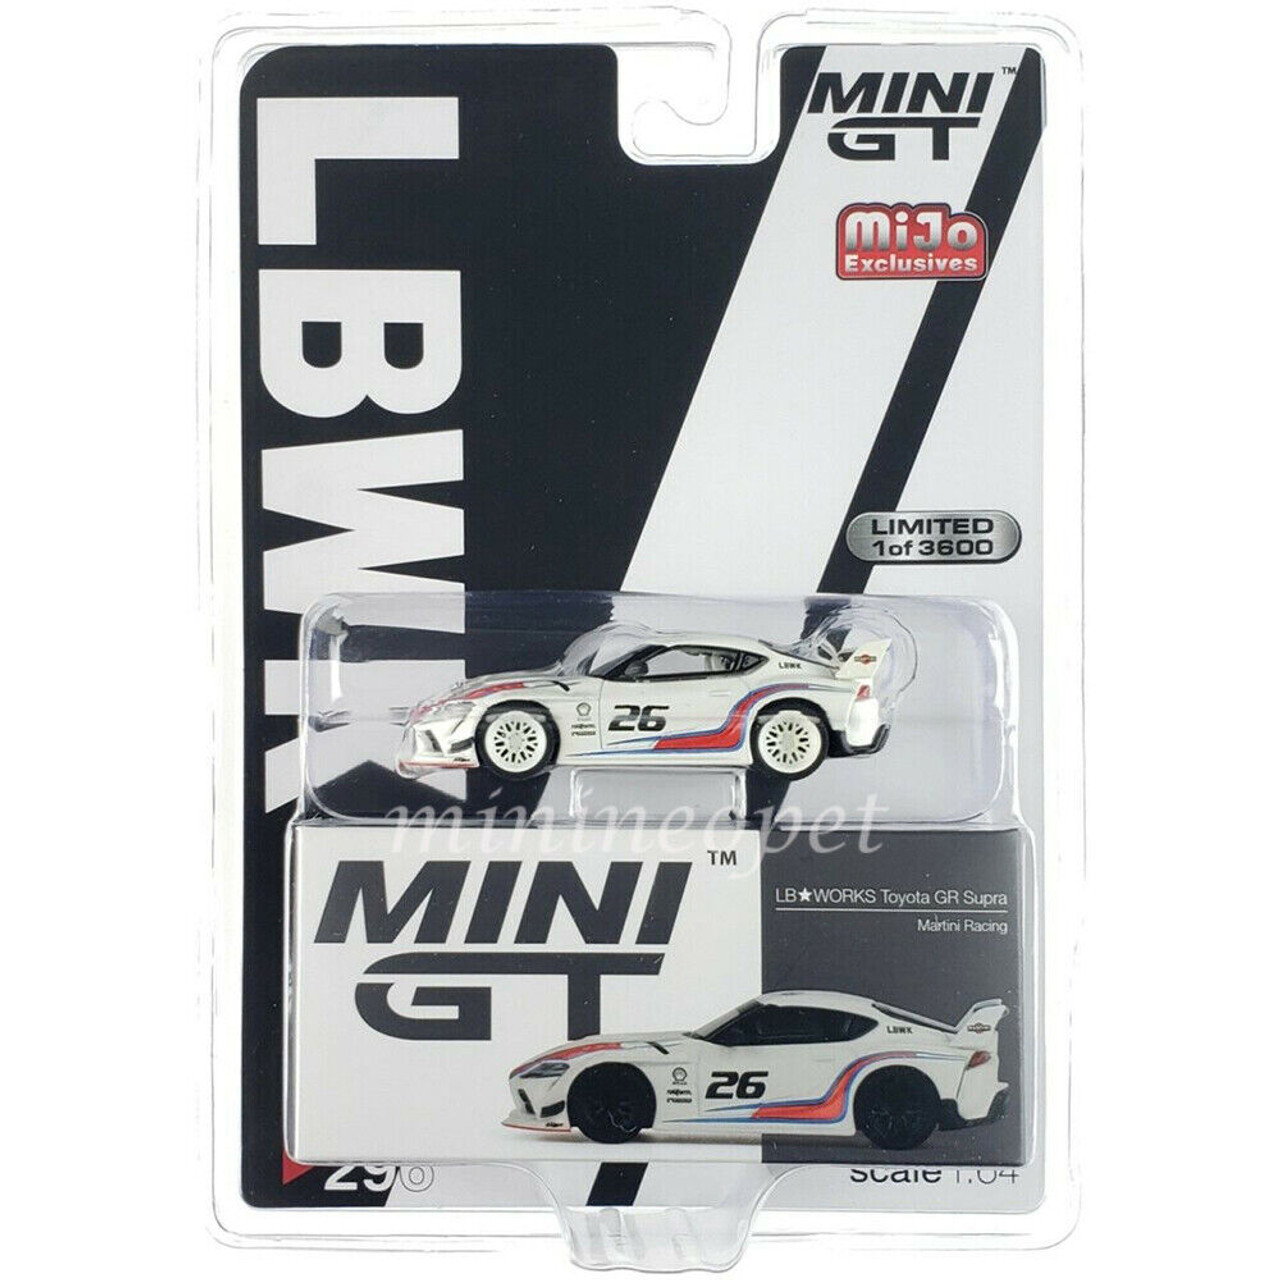 CHASE CAR 1/64 Mini GT Toyota GR Supra LB WORKS #26 White "Martini Racing" Limited Edition Diecast Car Model